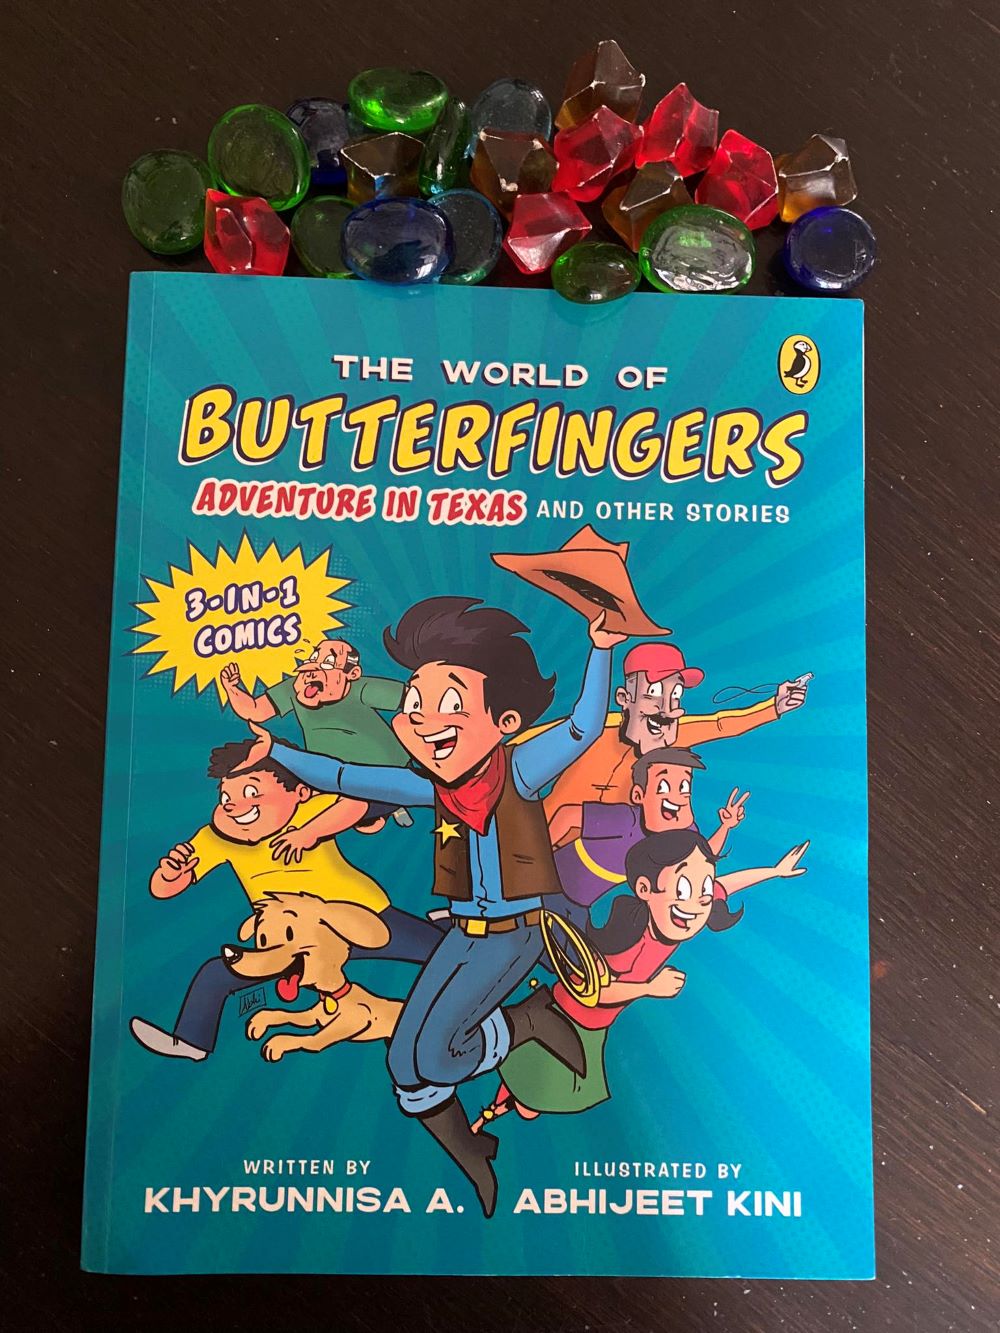 Review: The World of Butterfingers: Adventure in Texas and Other Stories